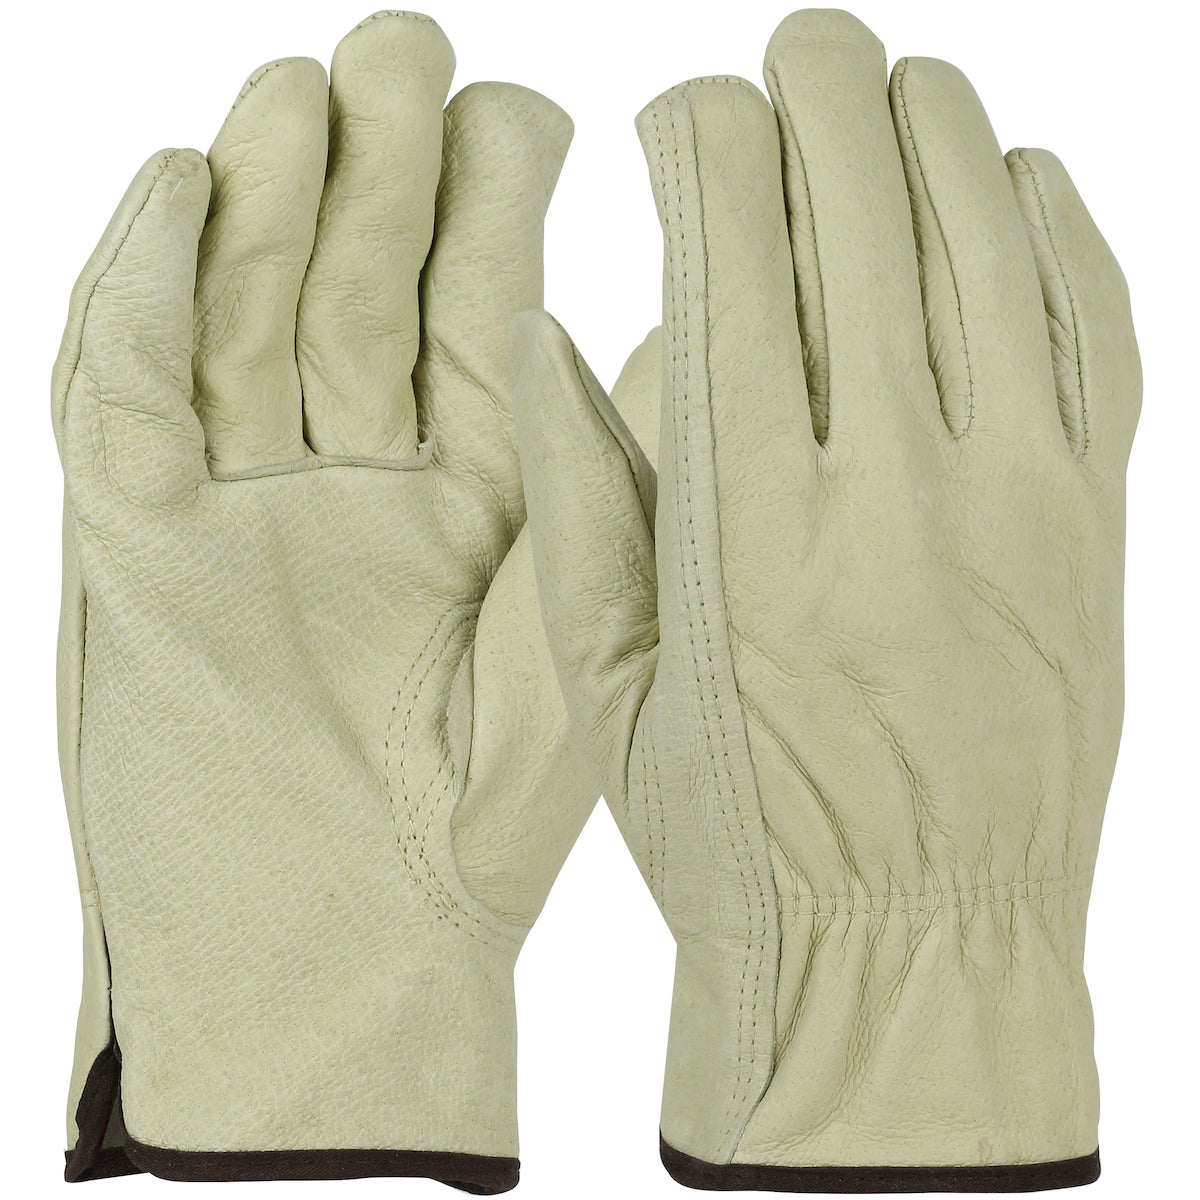 West Chester 994KF/L Economy Top Grain Pigskin Leather Drivers Glove with Red Fleece Lining - Keystone Thumb